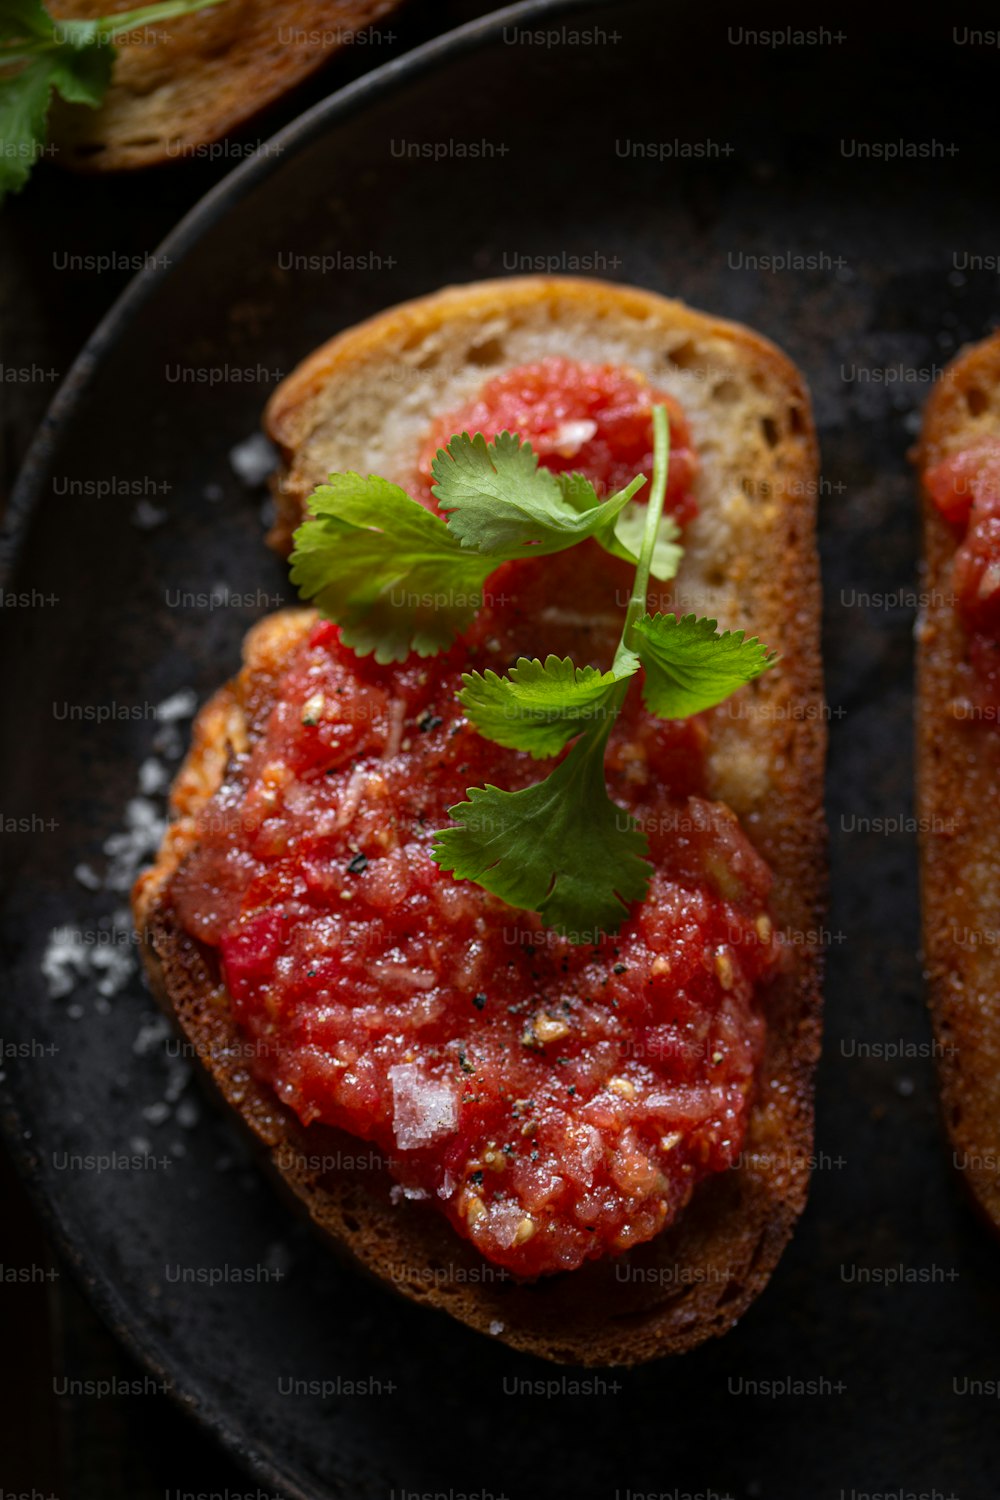 two pieces of bread with tomato sauce and parsley on top